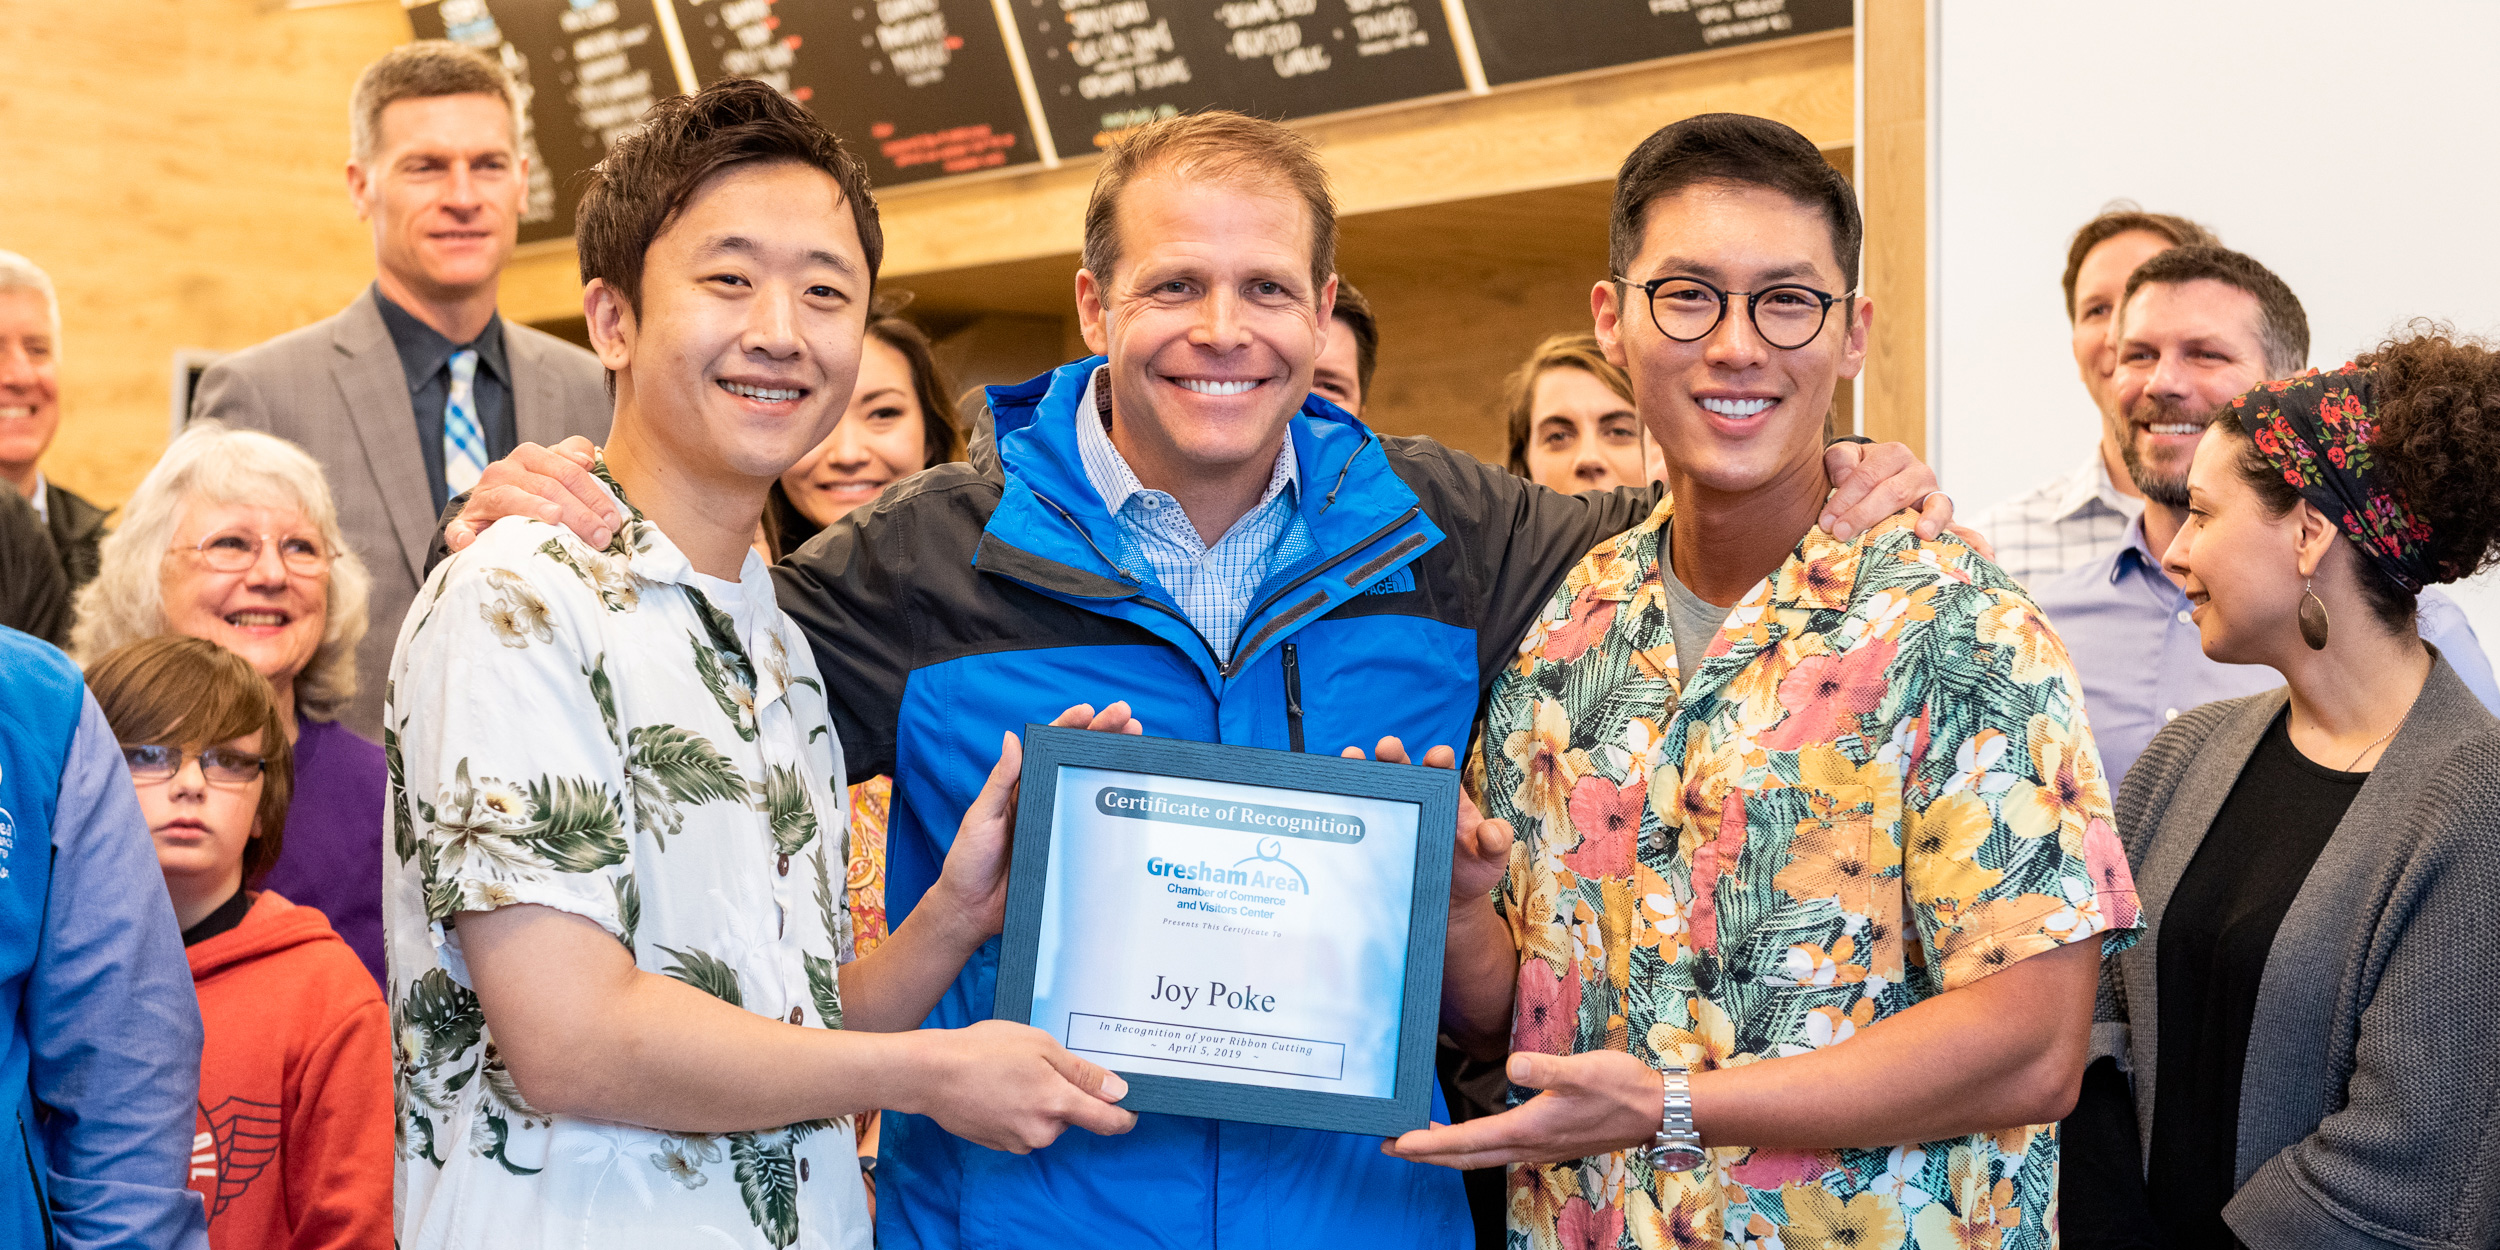 Joy Poke owner Justin, and partner Shaun, pose with the mayor of Troutdale, Casey Ryan